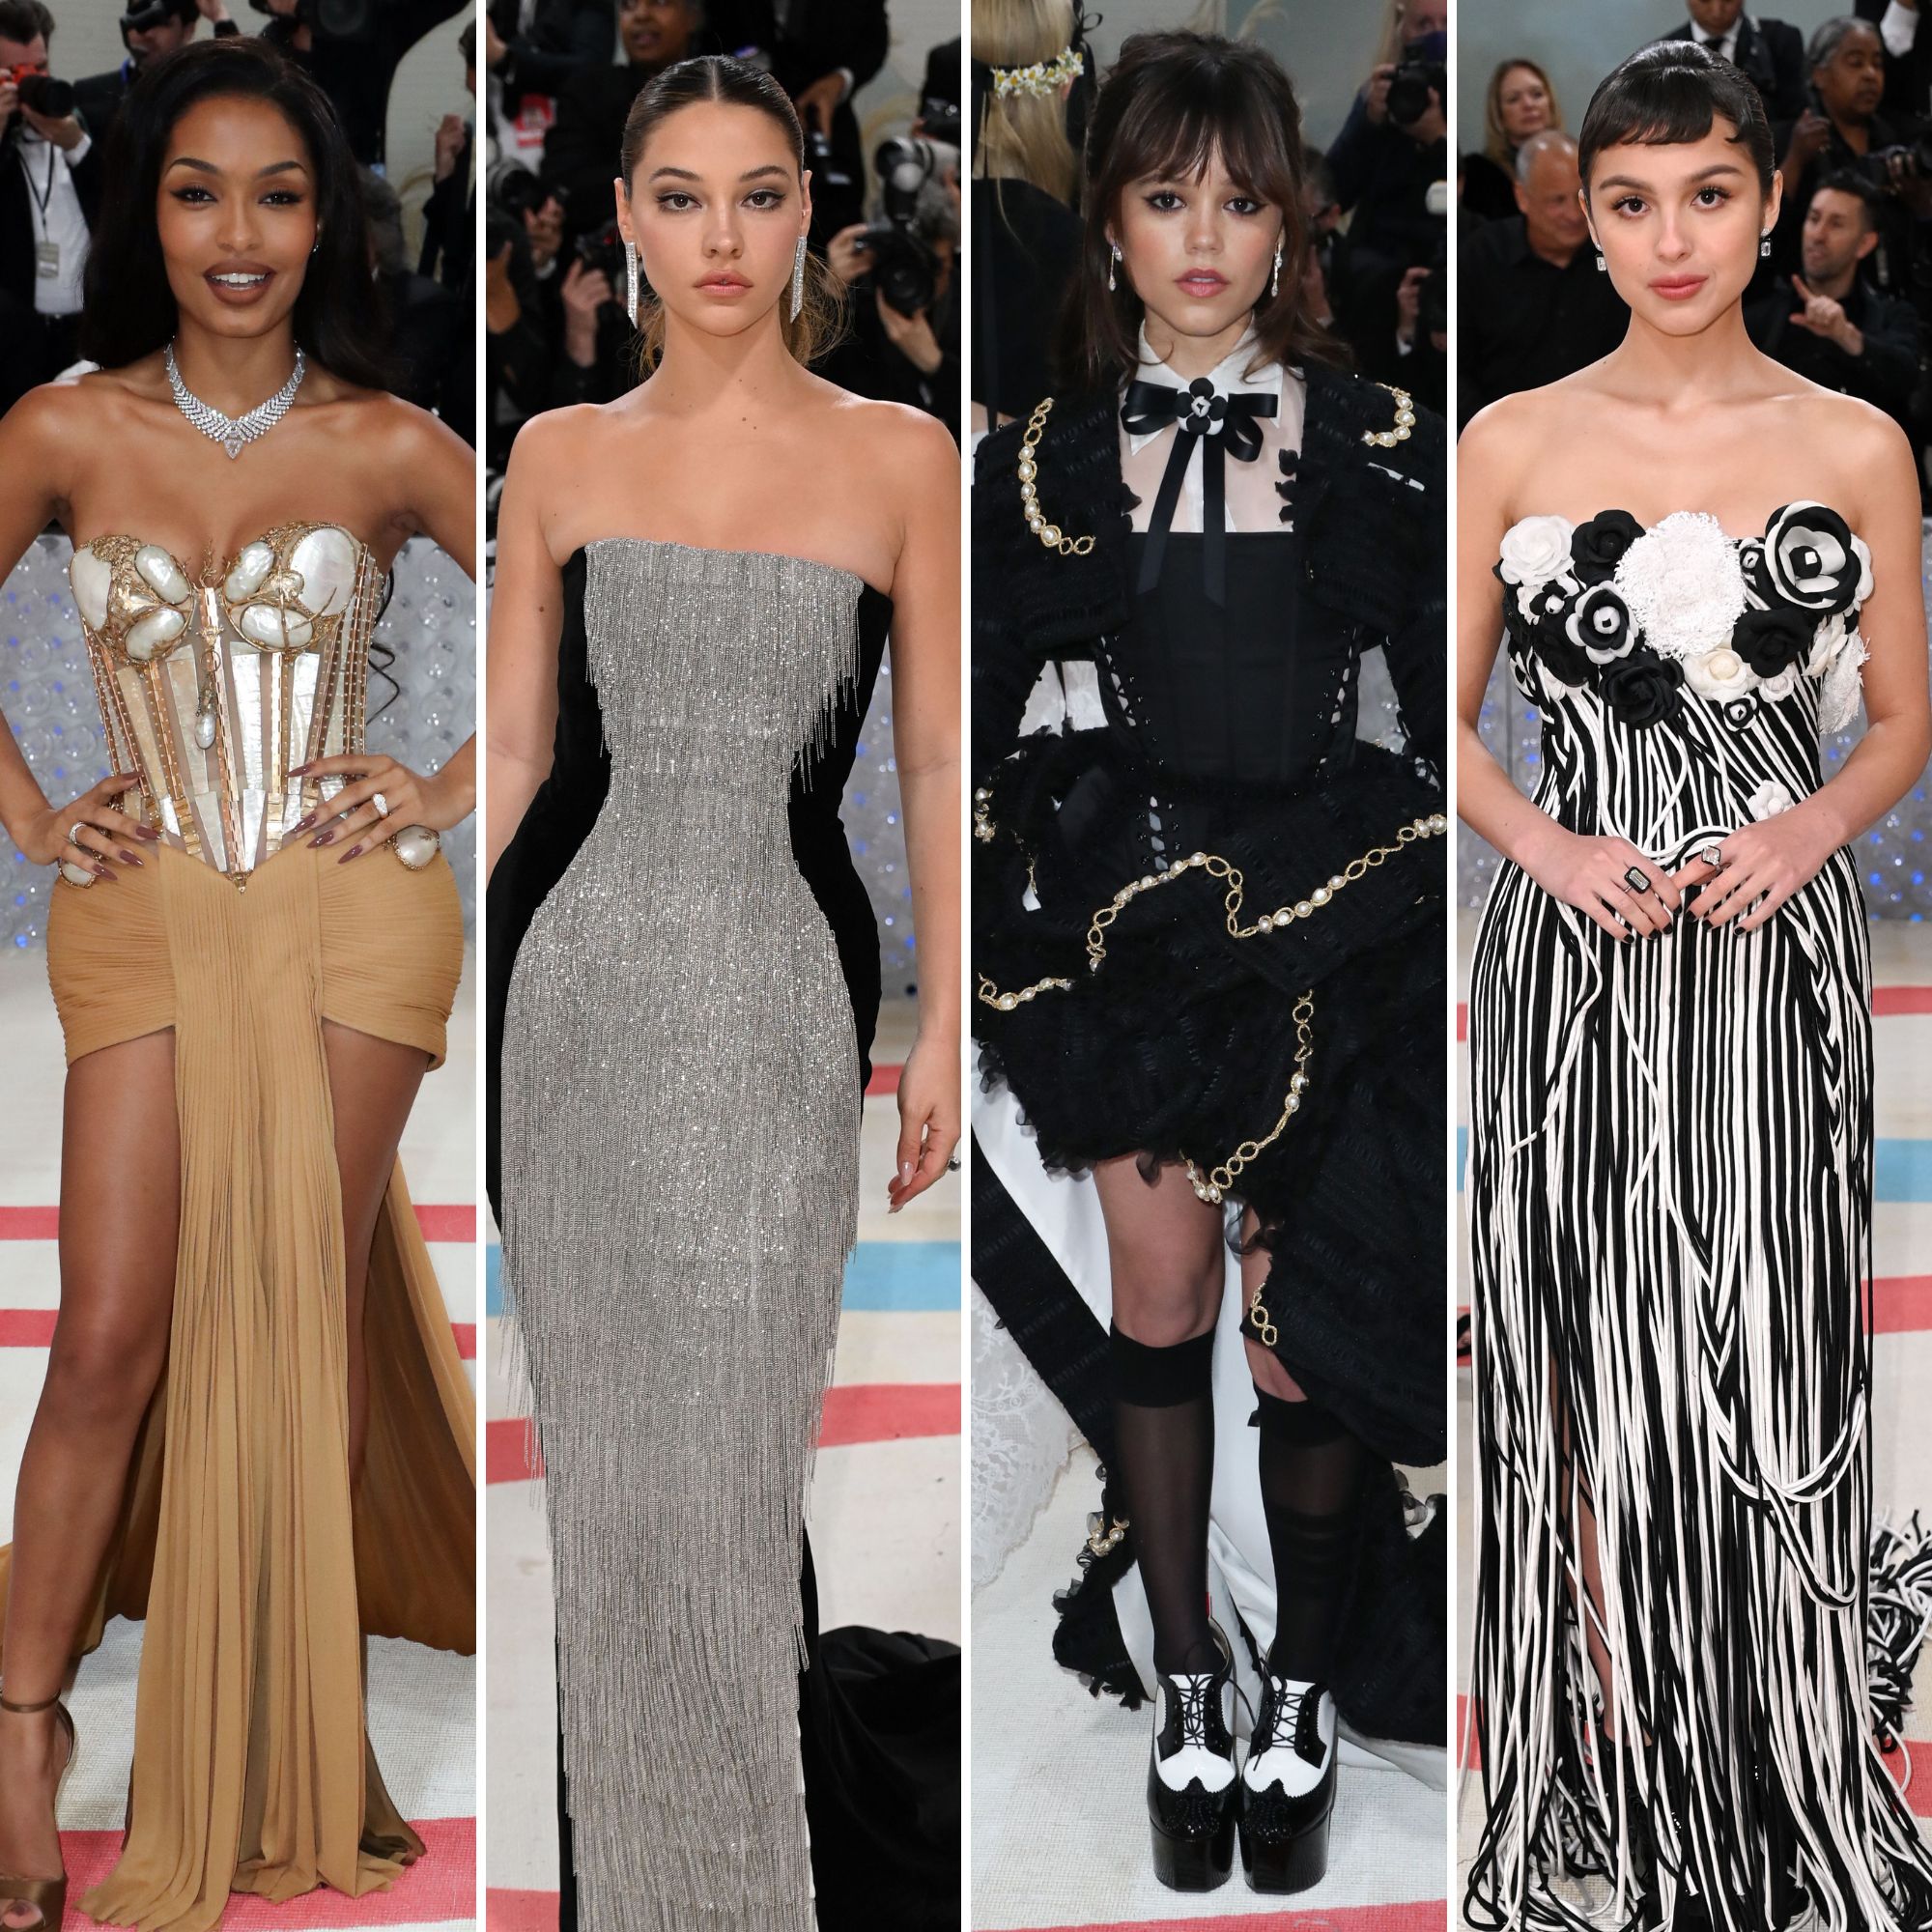 Here are all the best looks from the Met Gala 2023